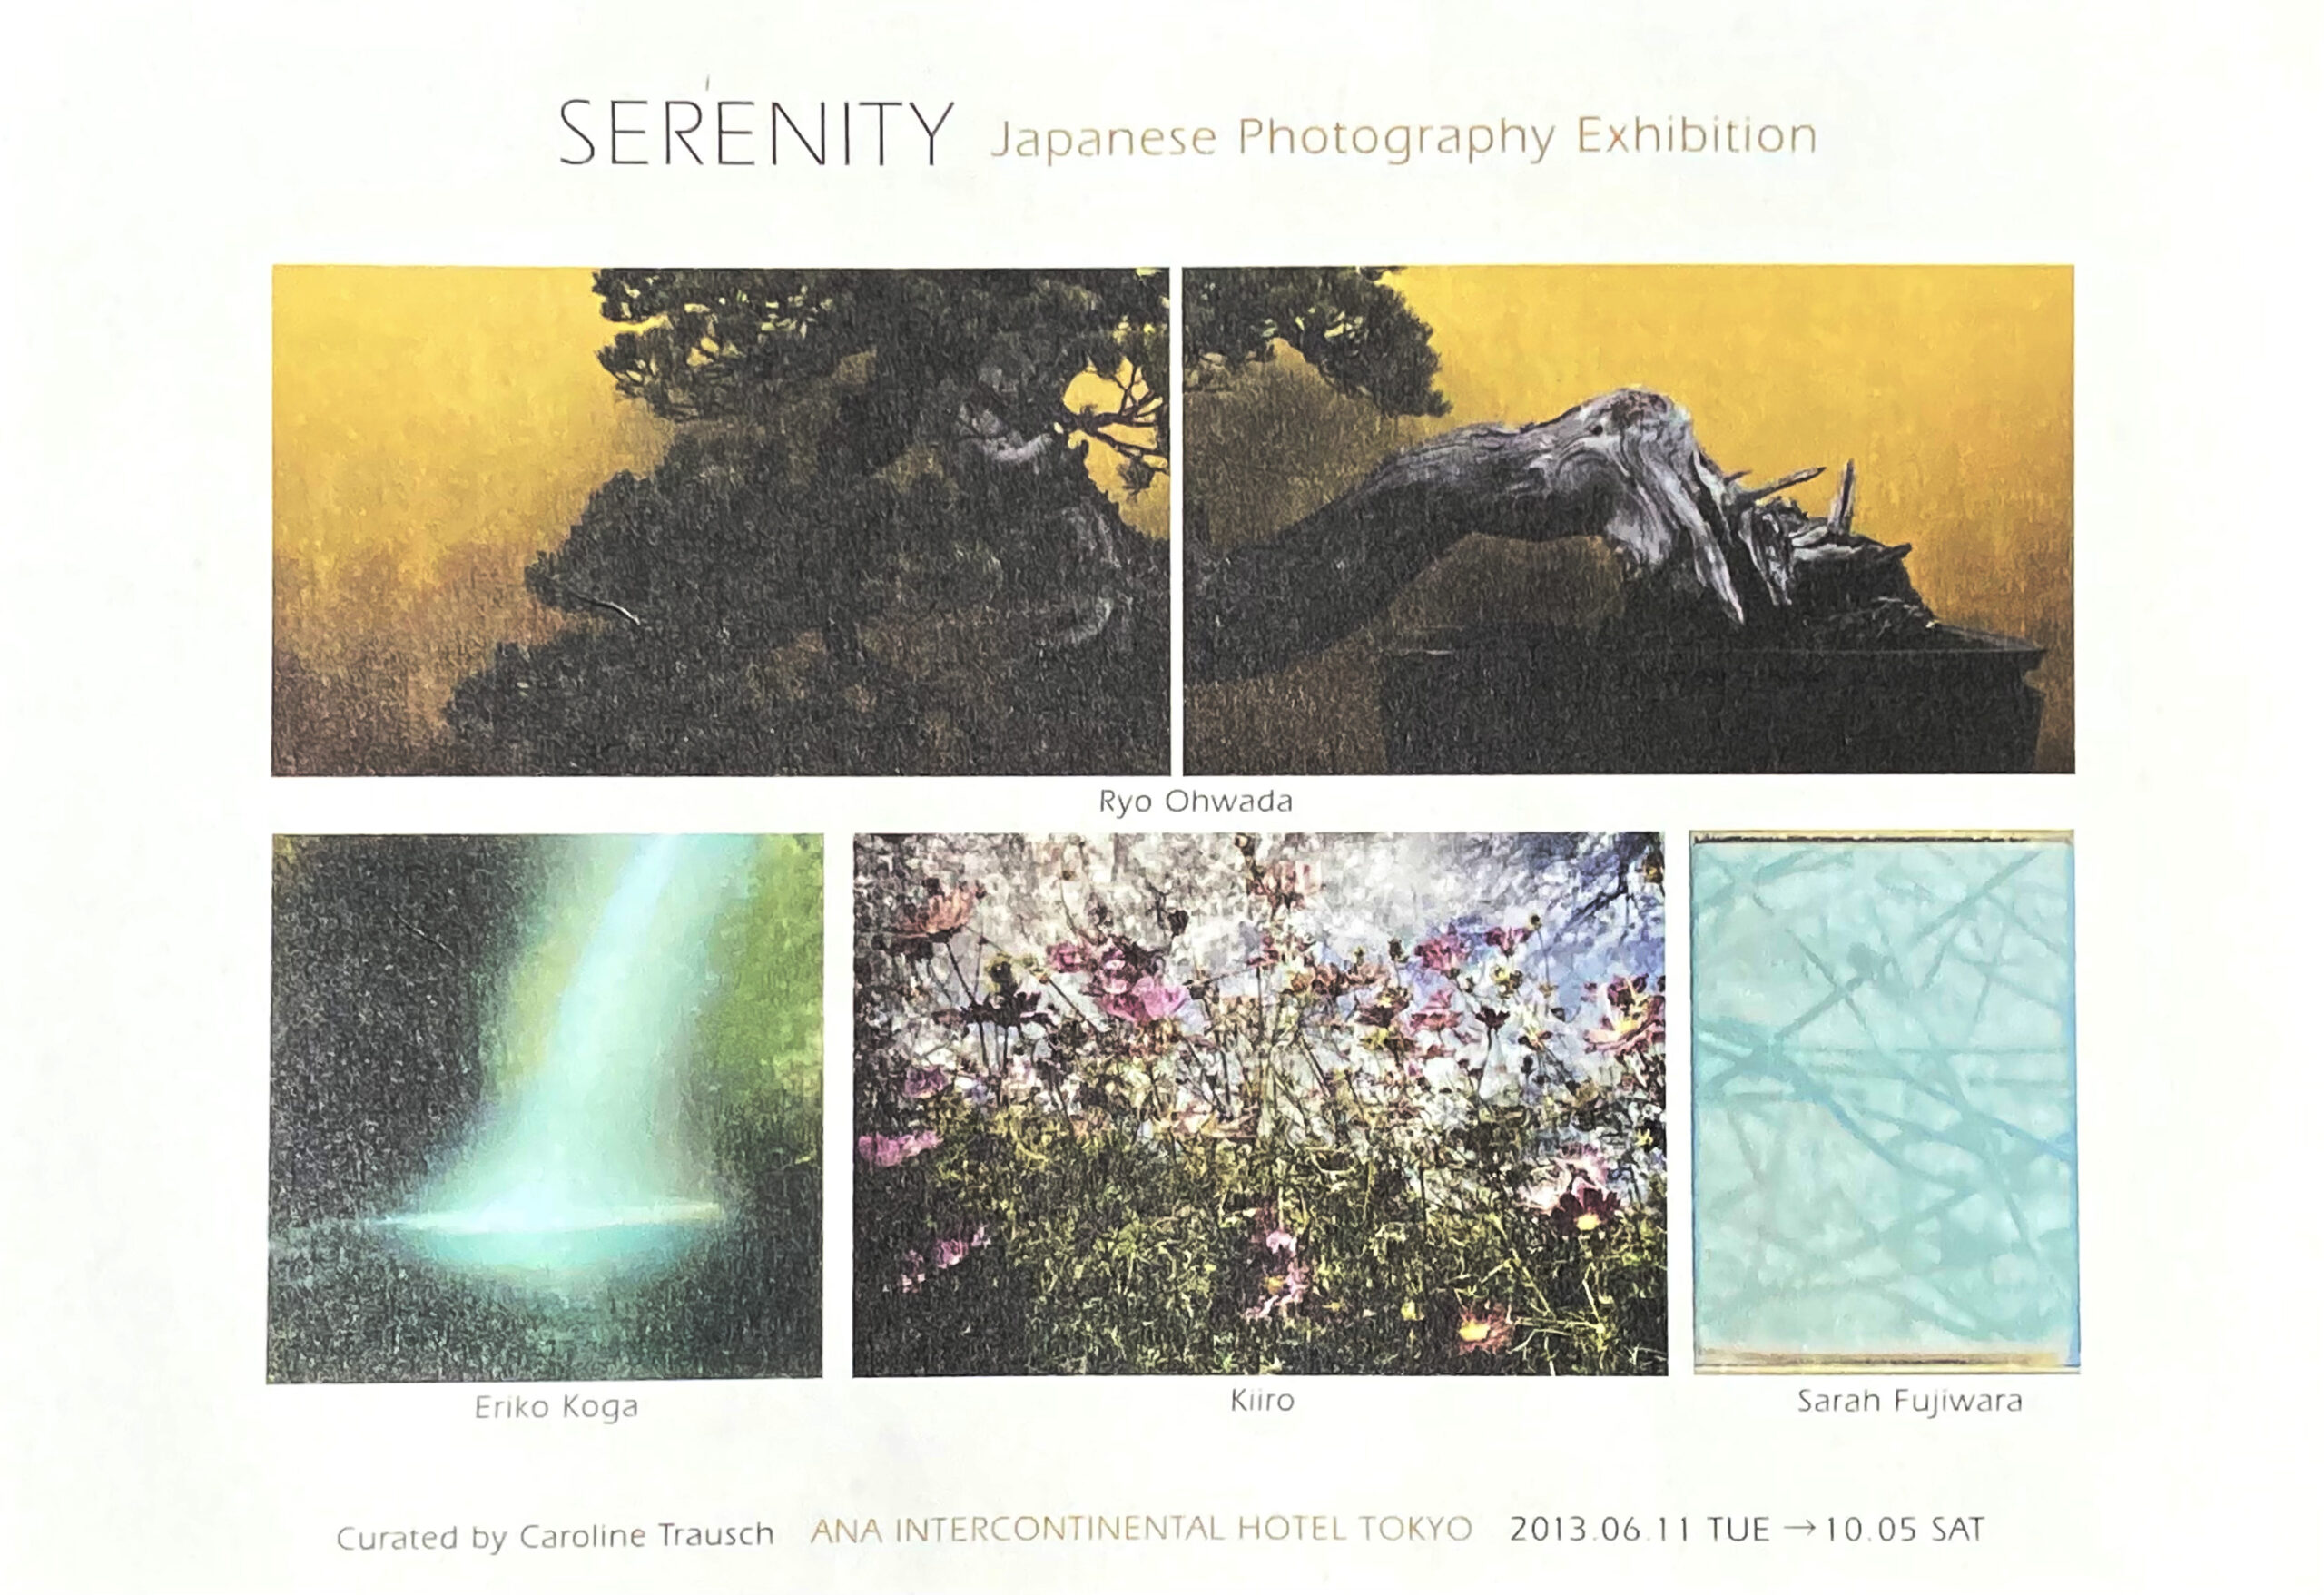 SERENITY Japanese Photography Exhibition, ANA INTER CONTINENTAL TOKYO Japan, June 11 – Oct. 05, 2013, group show